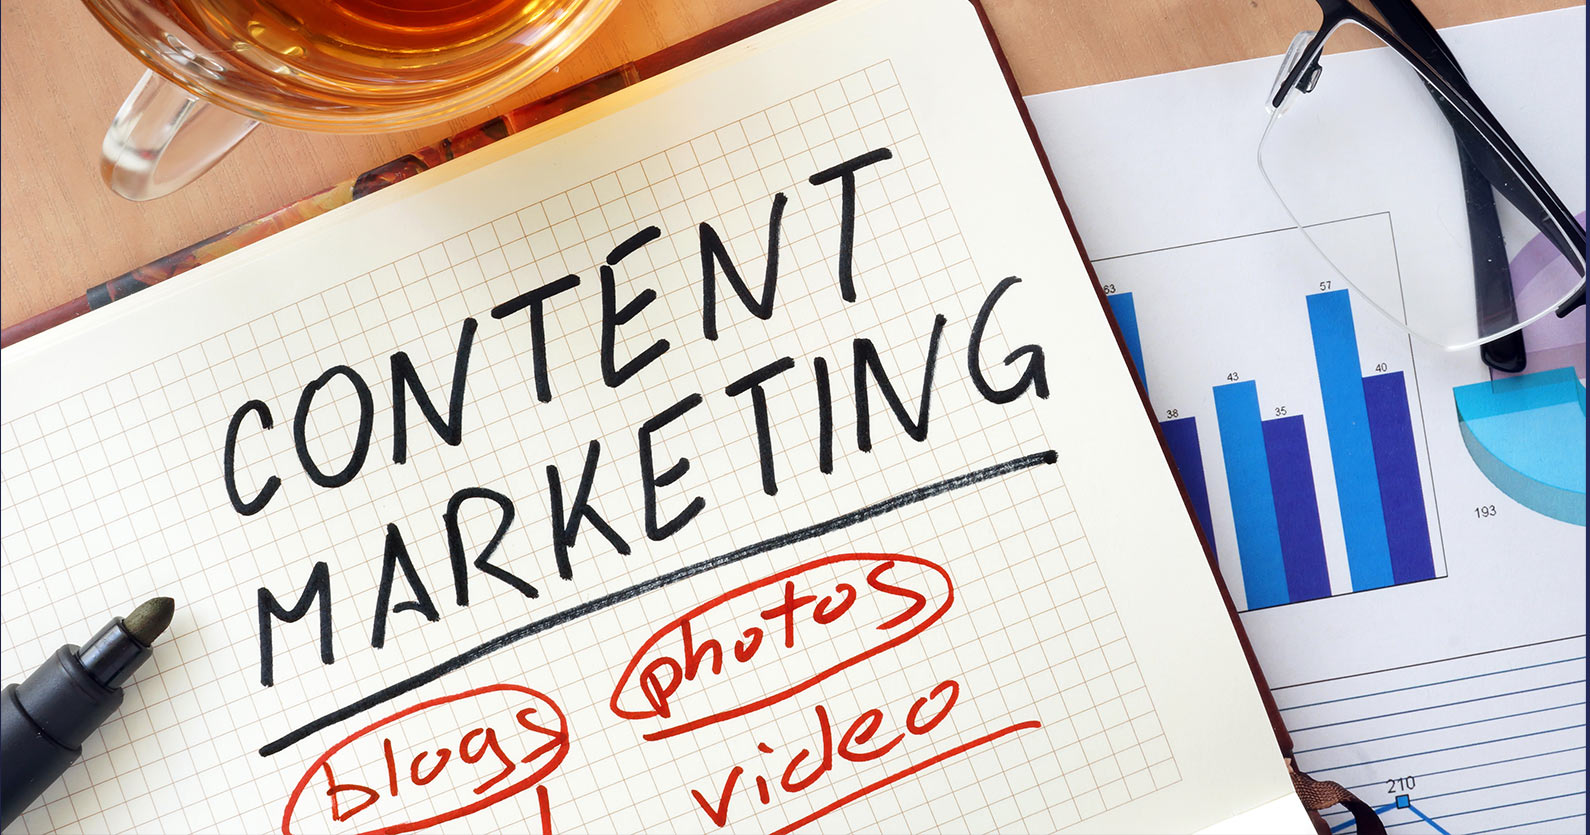 Notepad showing the words "Content Marketing" written on a page